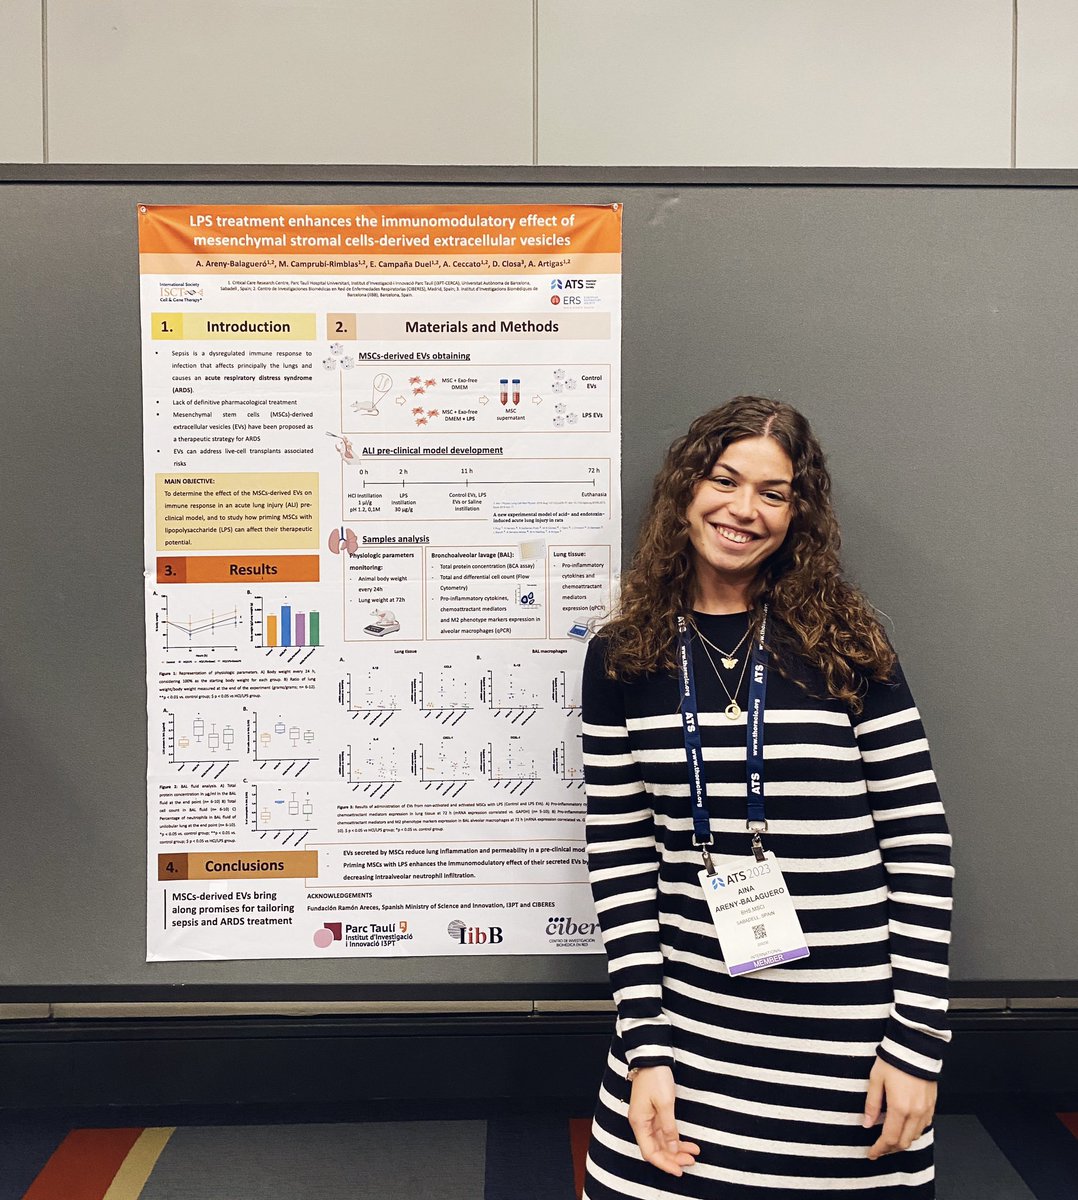 Yesterday I had the opportunity to present some of the results obtained from my PhD thesis about #cellulartherapy and its effect on #acutelunginjury👩🏻‍🔬🫁 in the @atscommunity annual congress. Outstanding seminars and speakers! #CIBERESinATS2023 #ATS2023 @Breath4Research